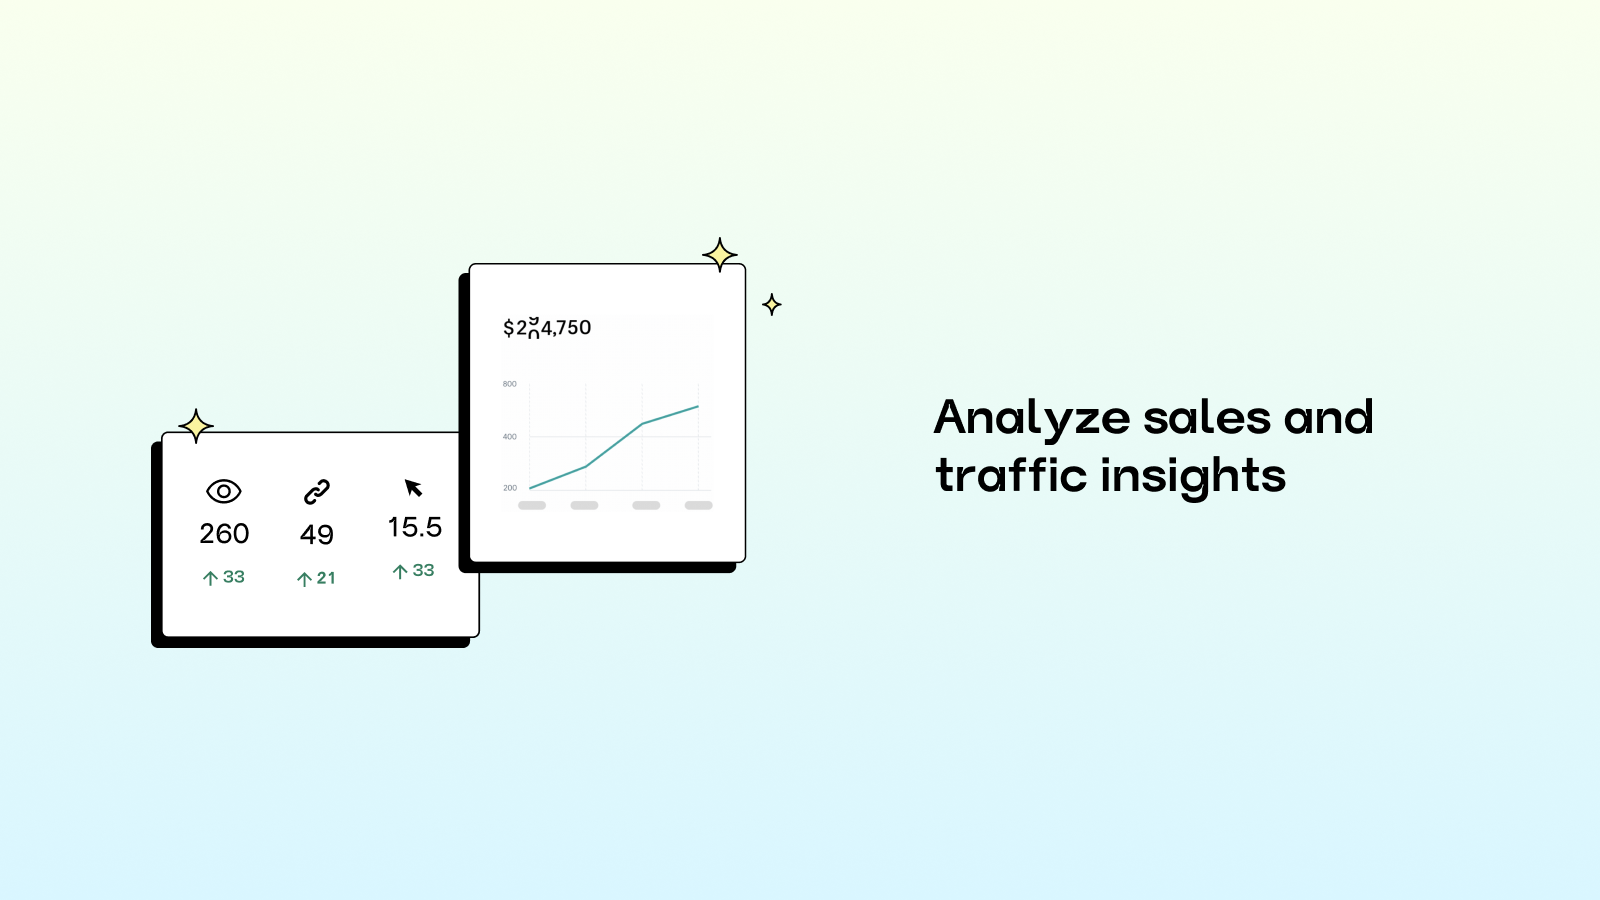 Analyze sales and traffic insights